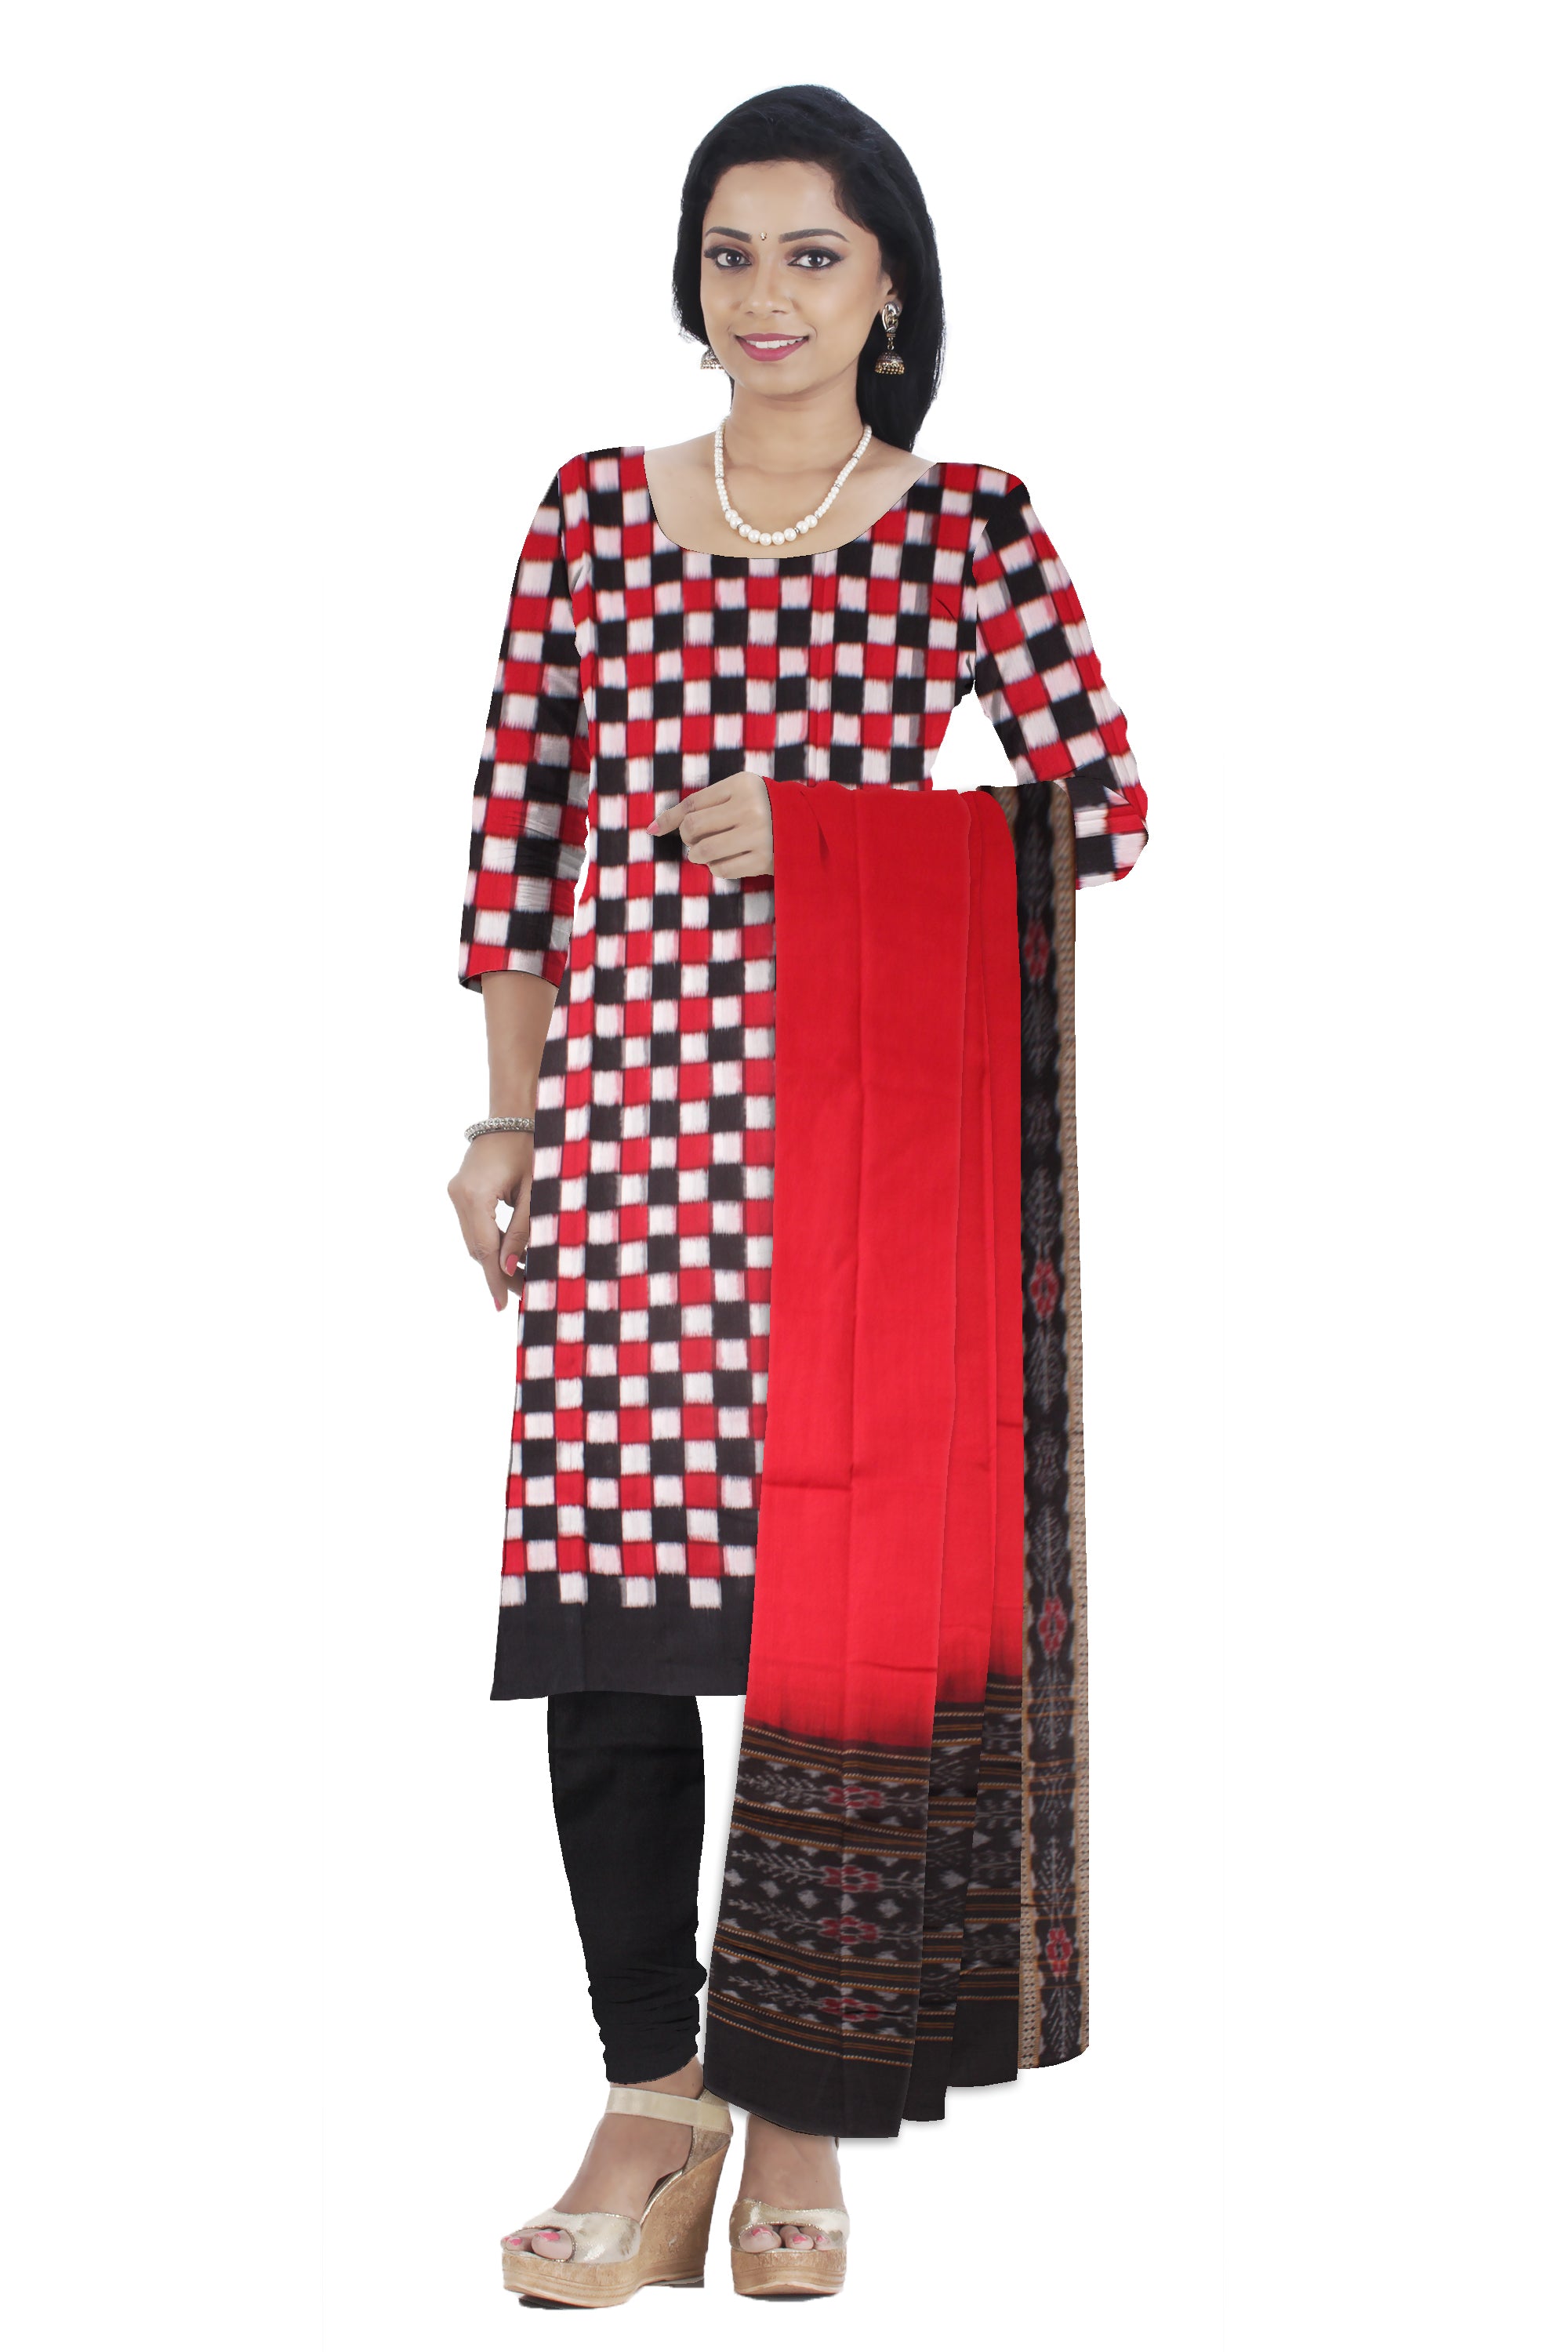 Full body pasapali pattern in red , black and white colour with dupatta. Unstitched cotton dress set. - Koshali Arts & Crafts Enterprise